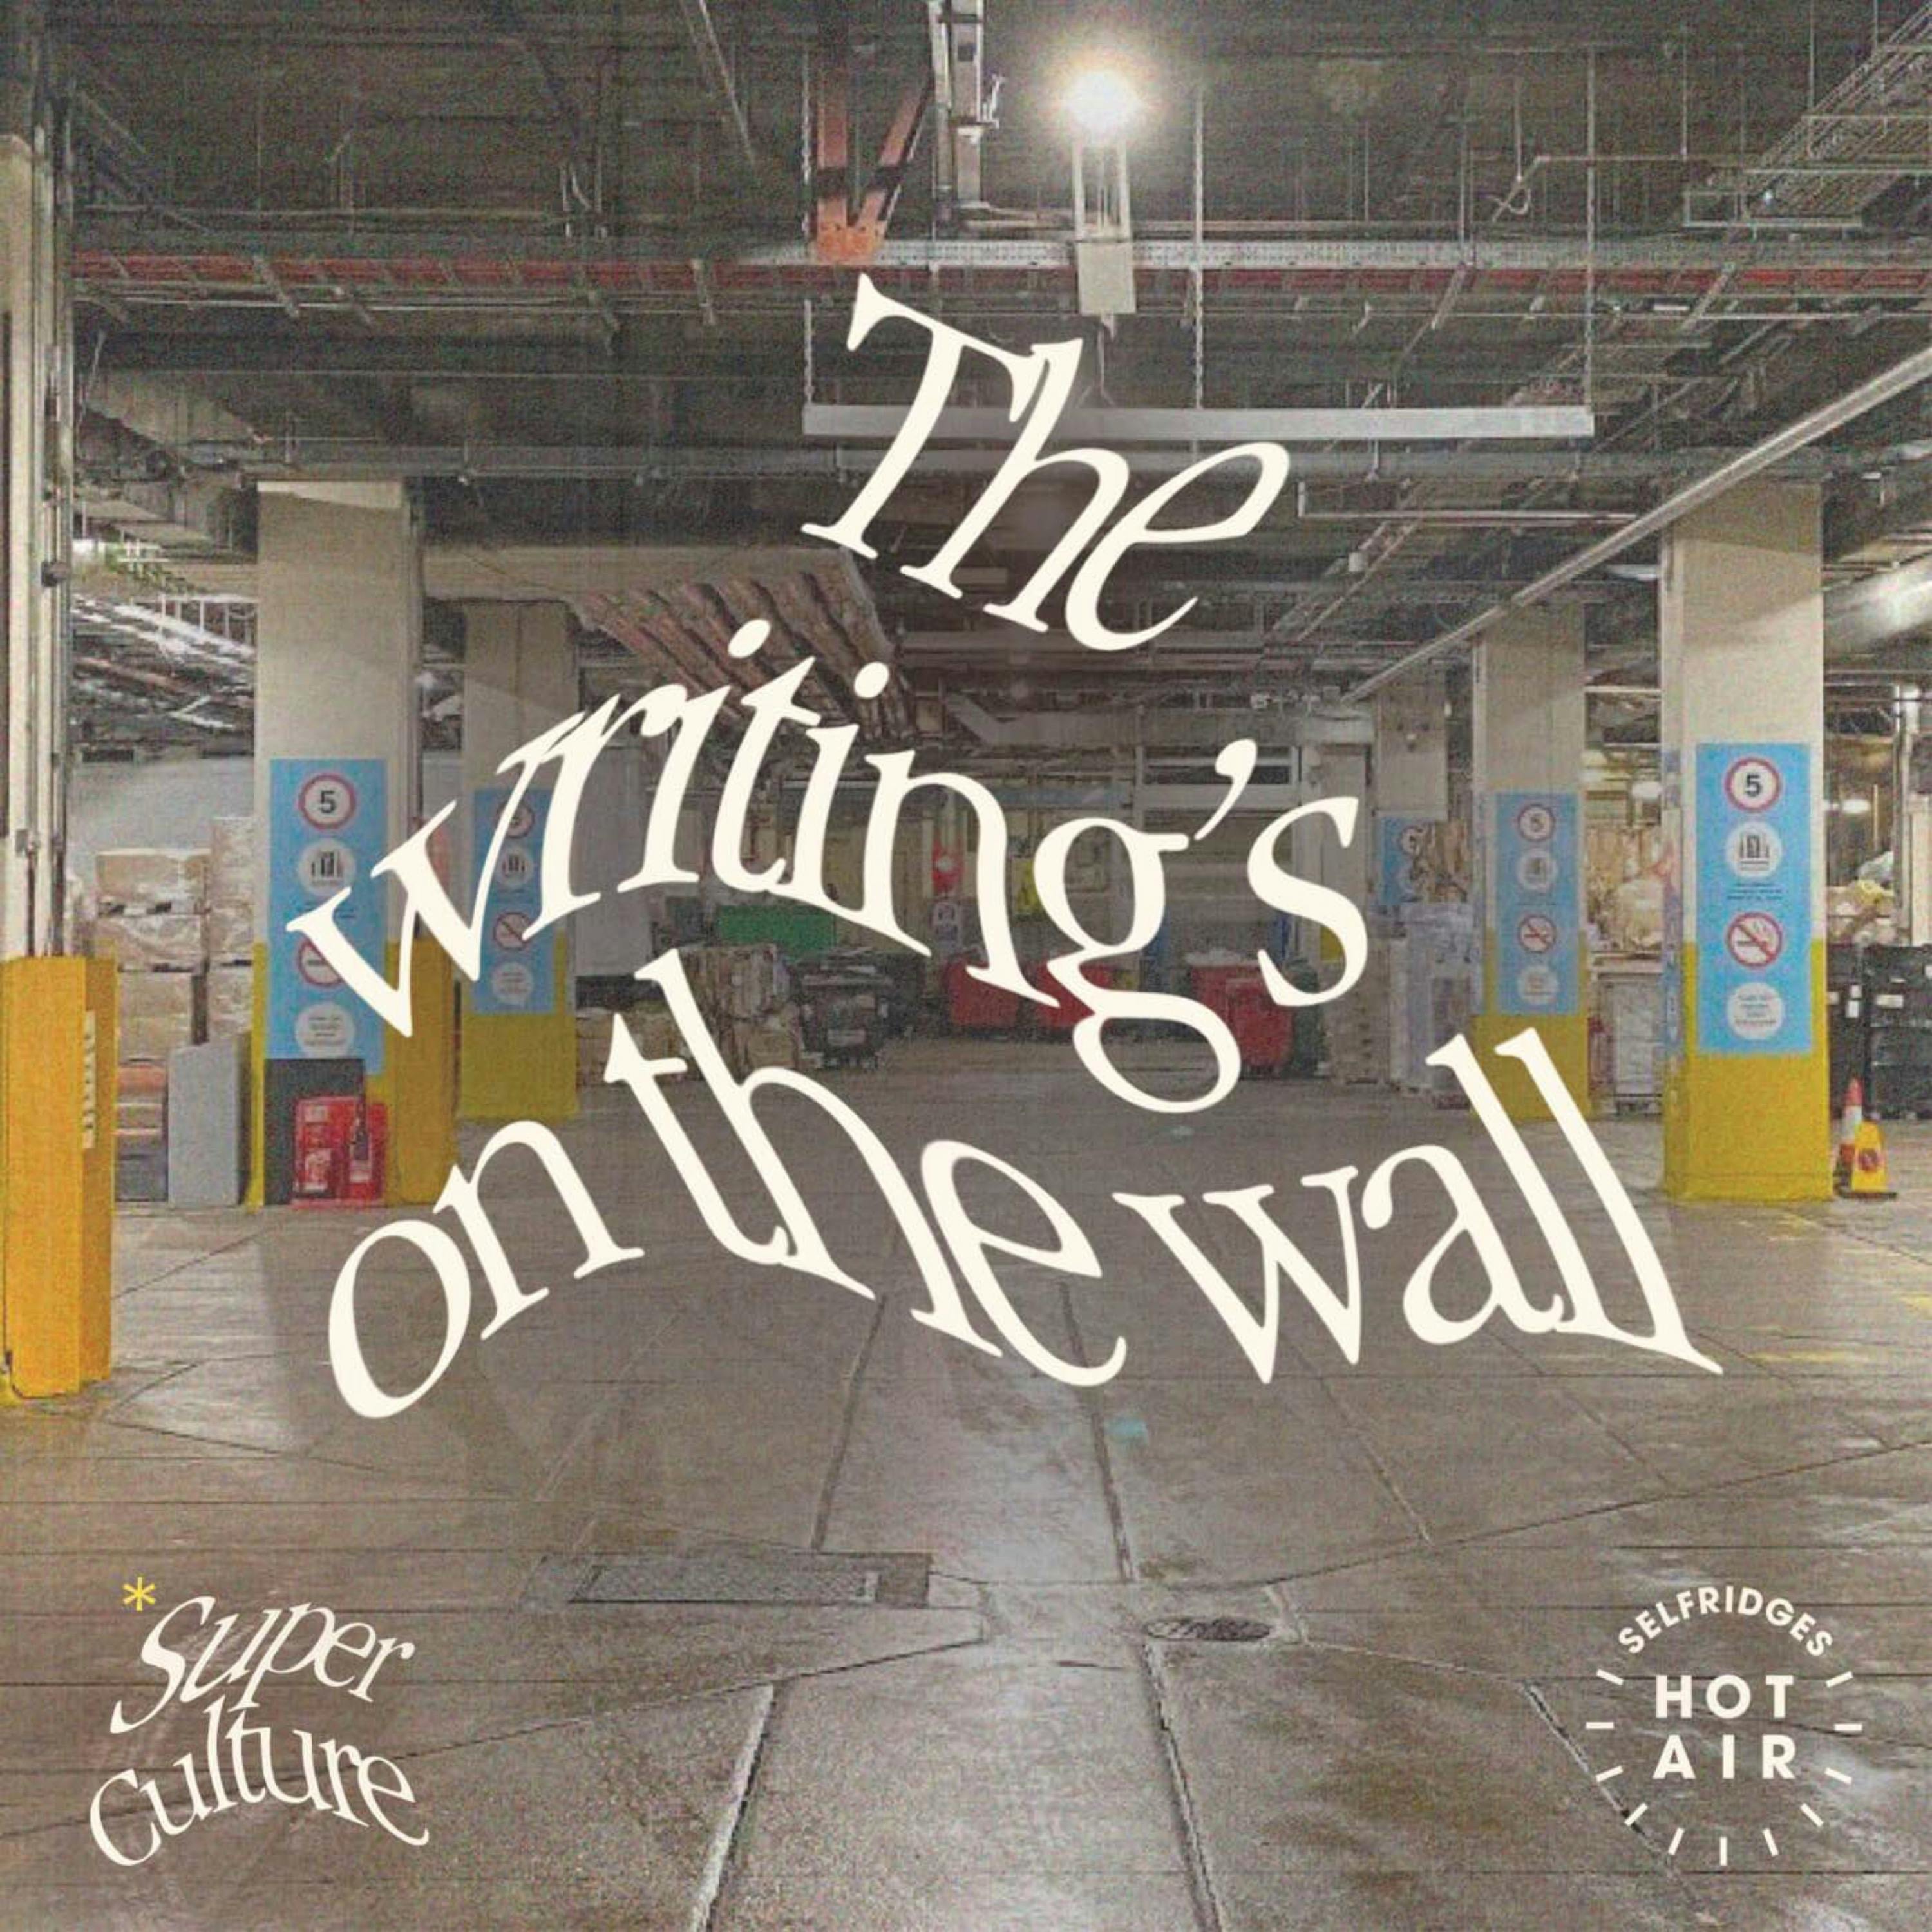 Super Culture: The writing’s on the wall